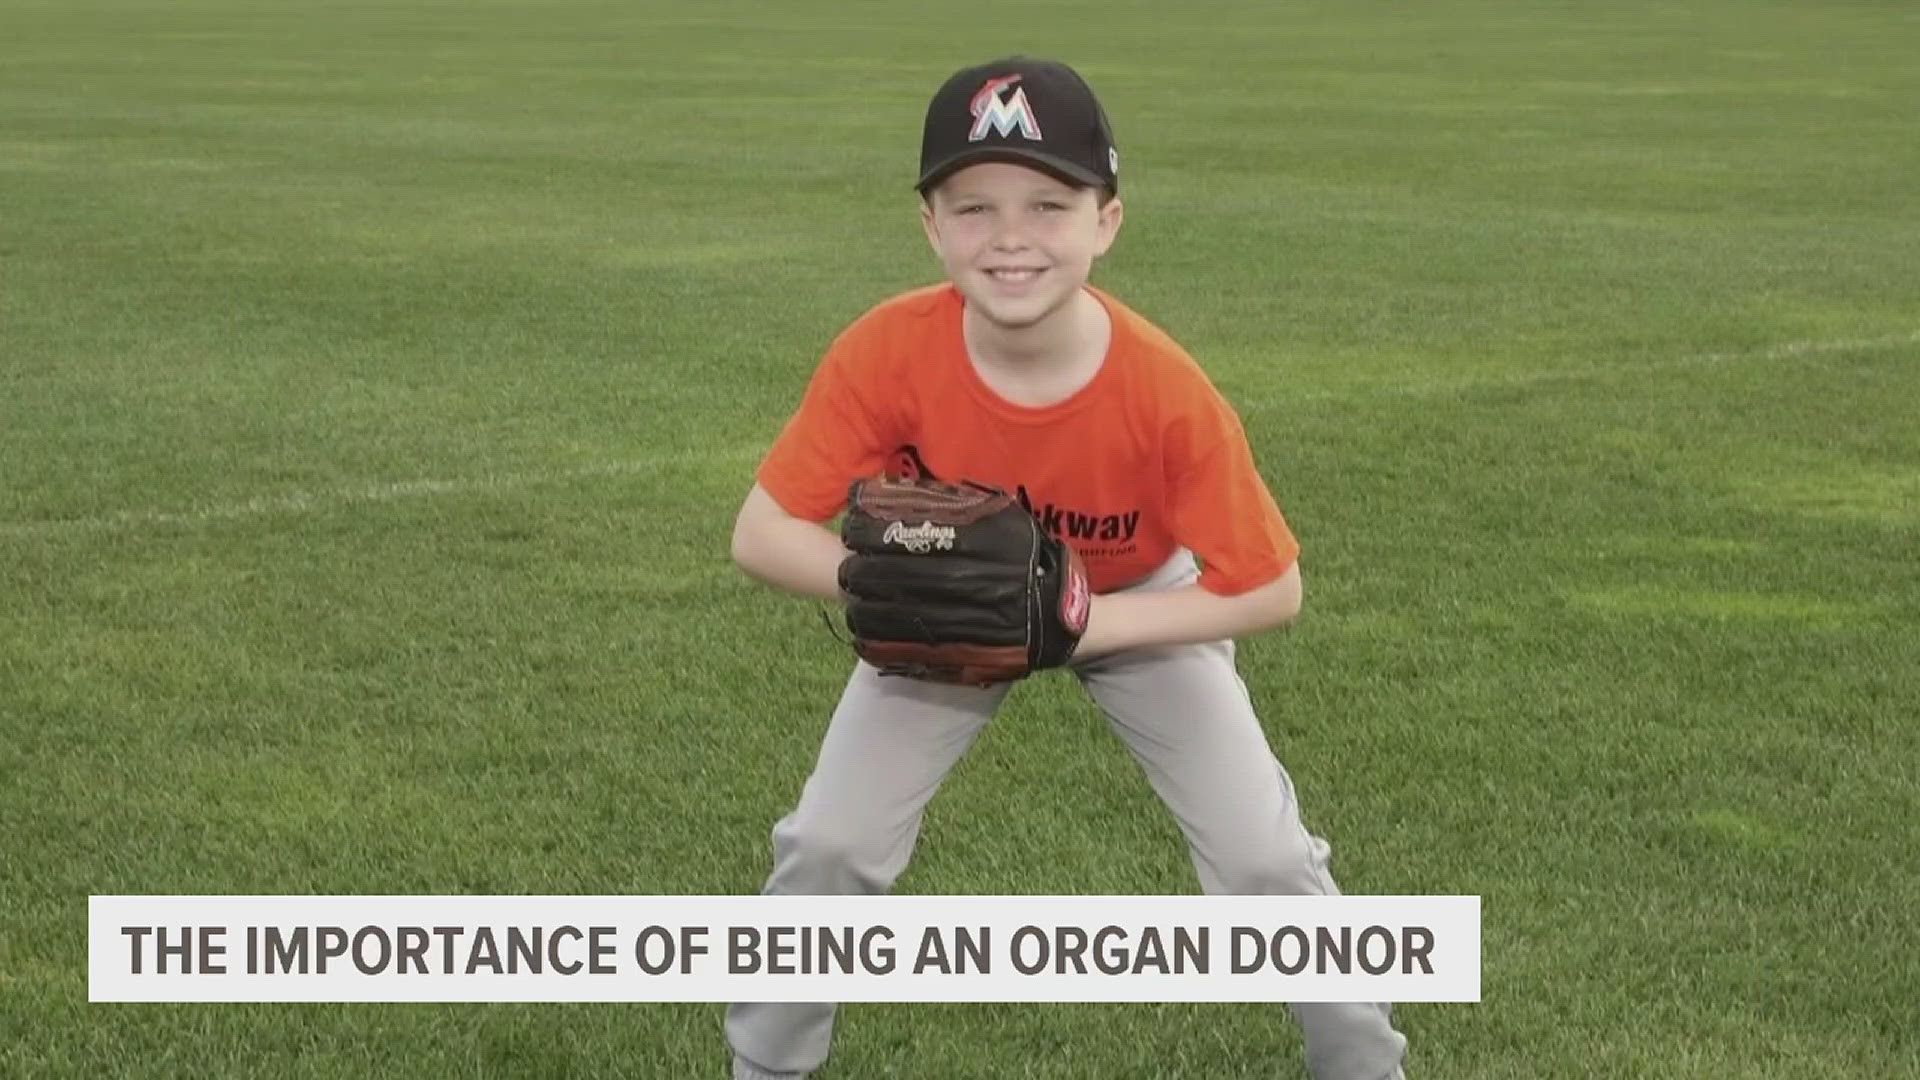 There are more than 100,000 people waiting for a life-saving organ transplant in the U.S., including 673 in Iowa.